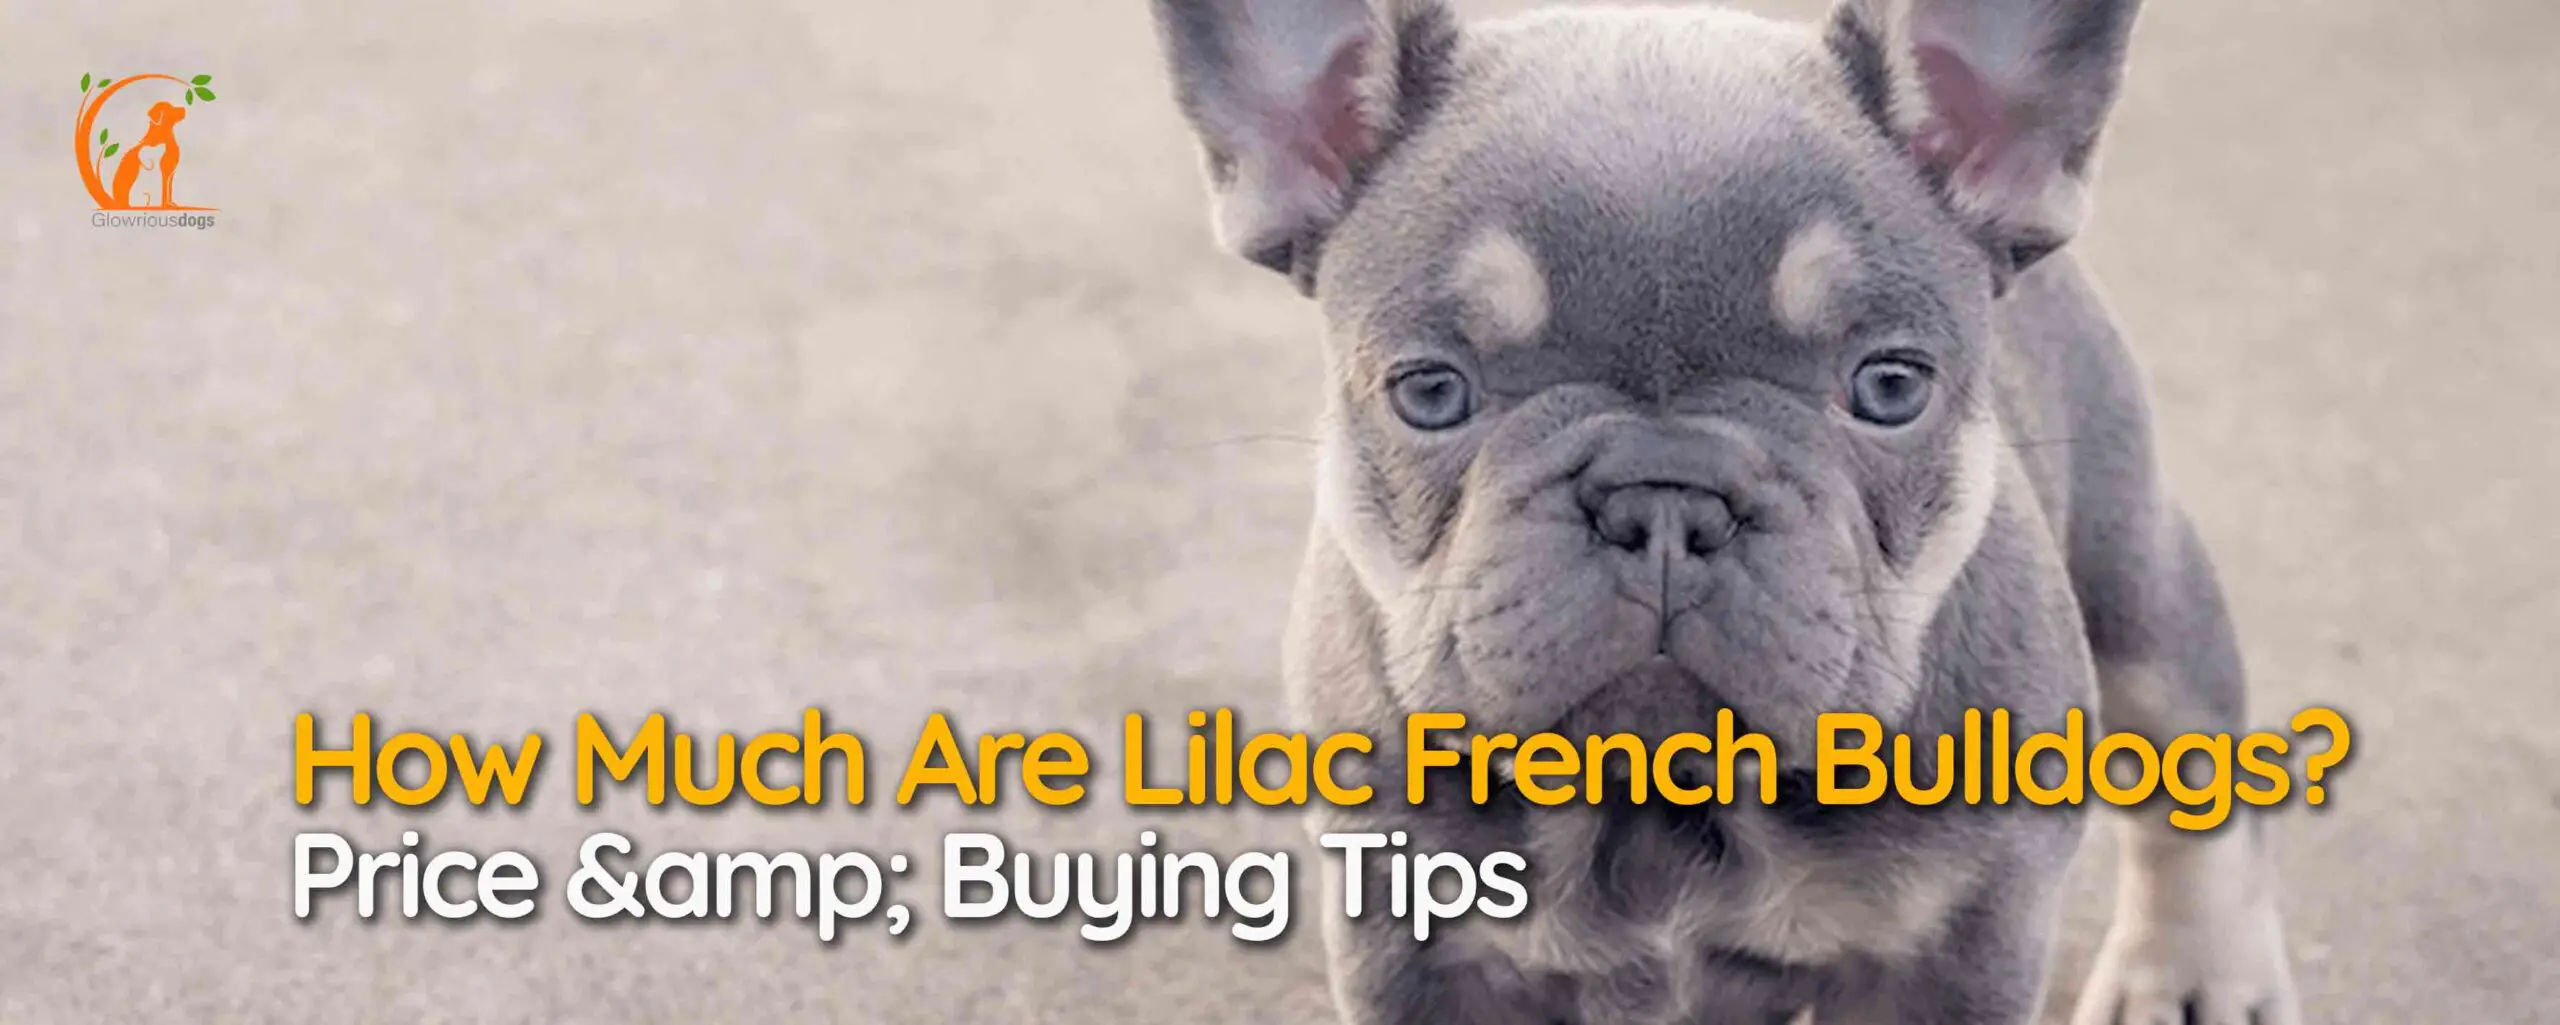 How Much Are Lilac French Bulldogs? Price & Buying Tips